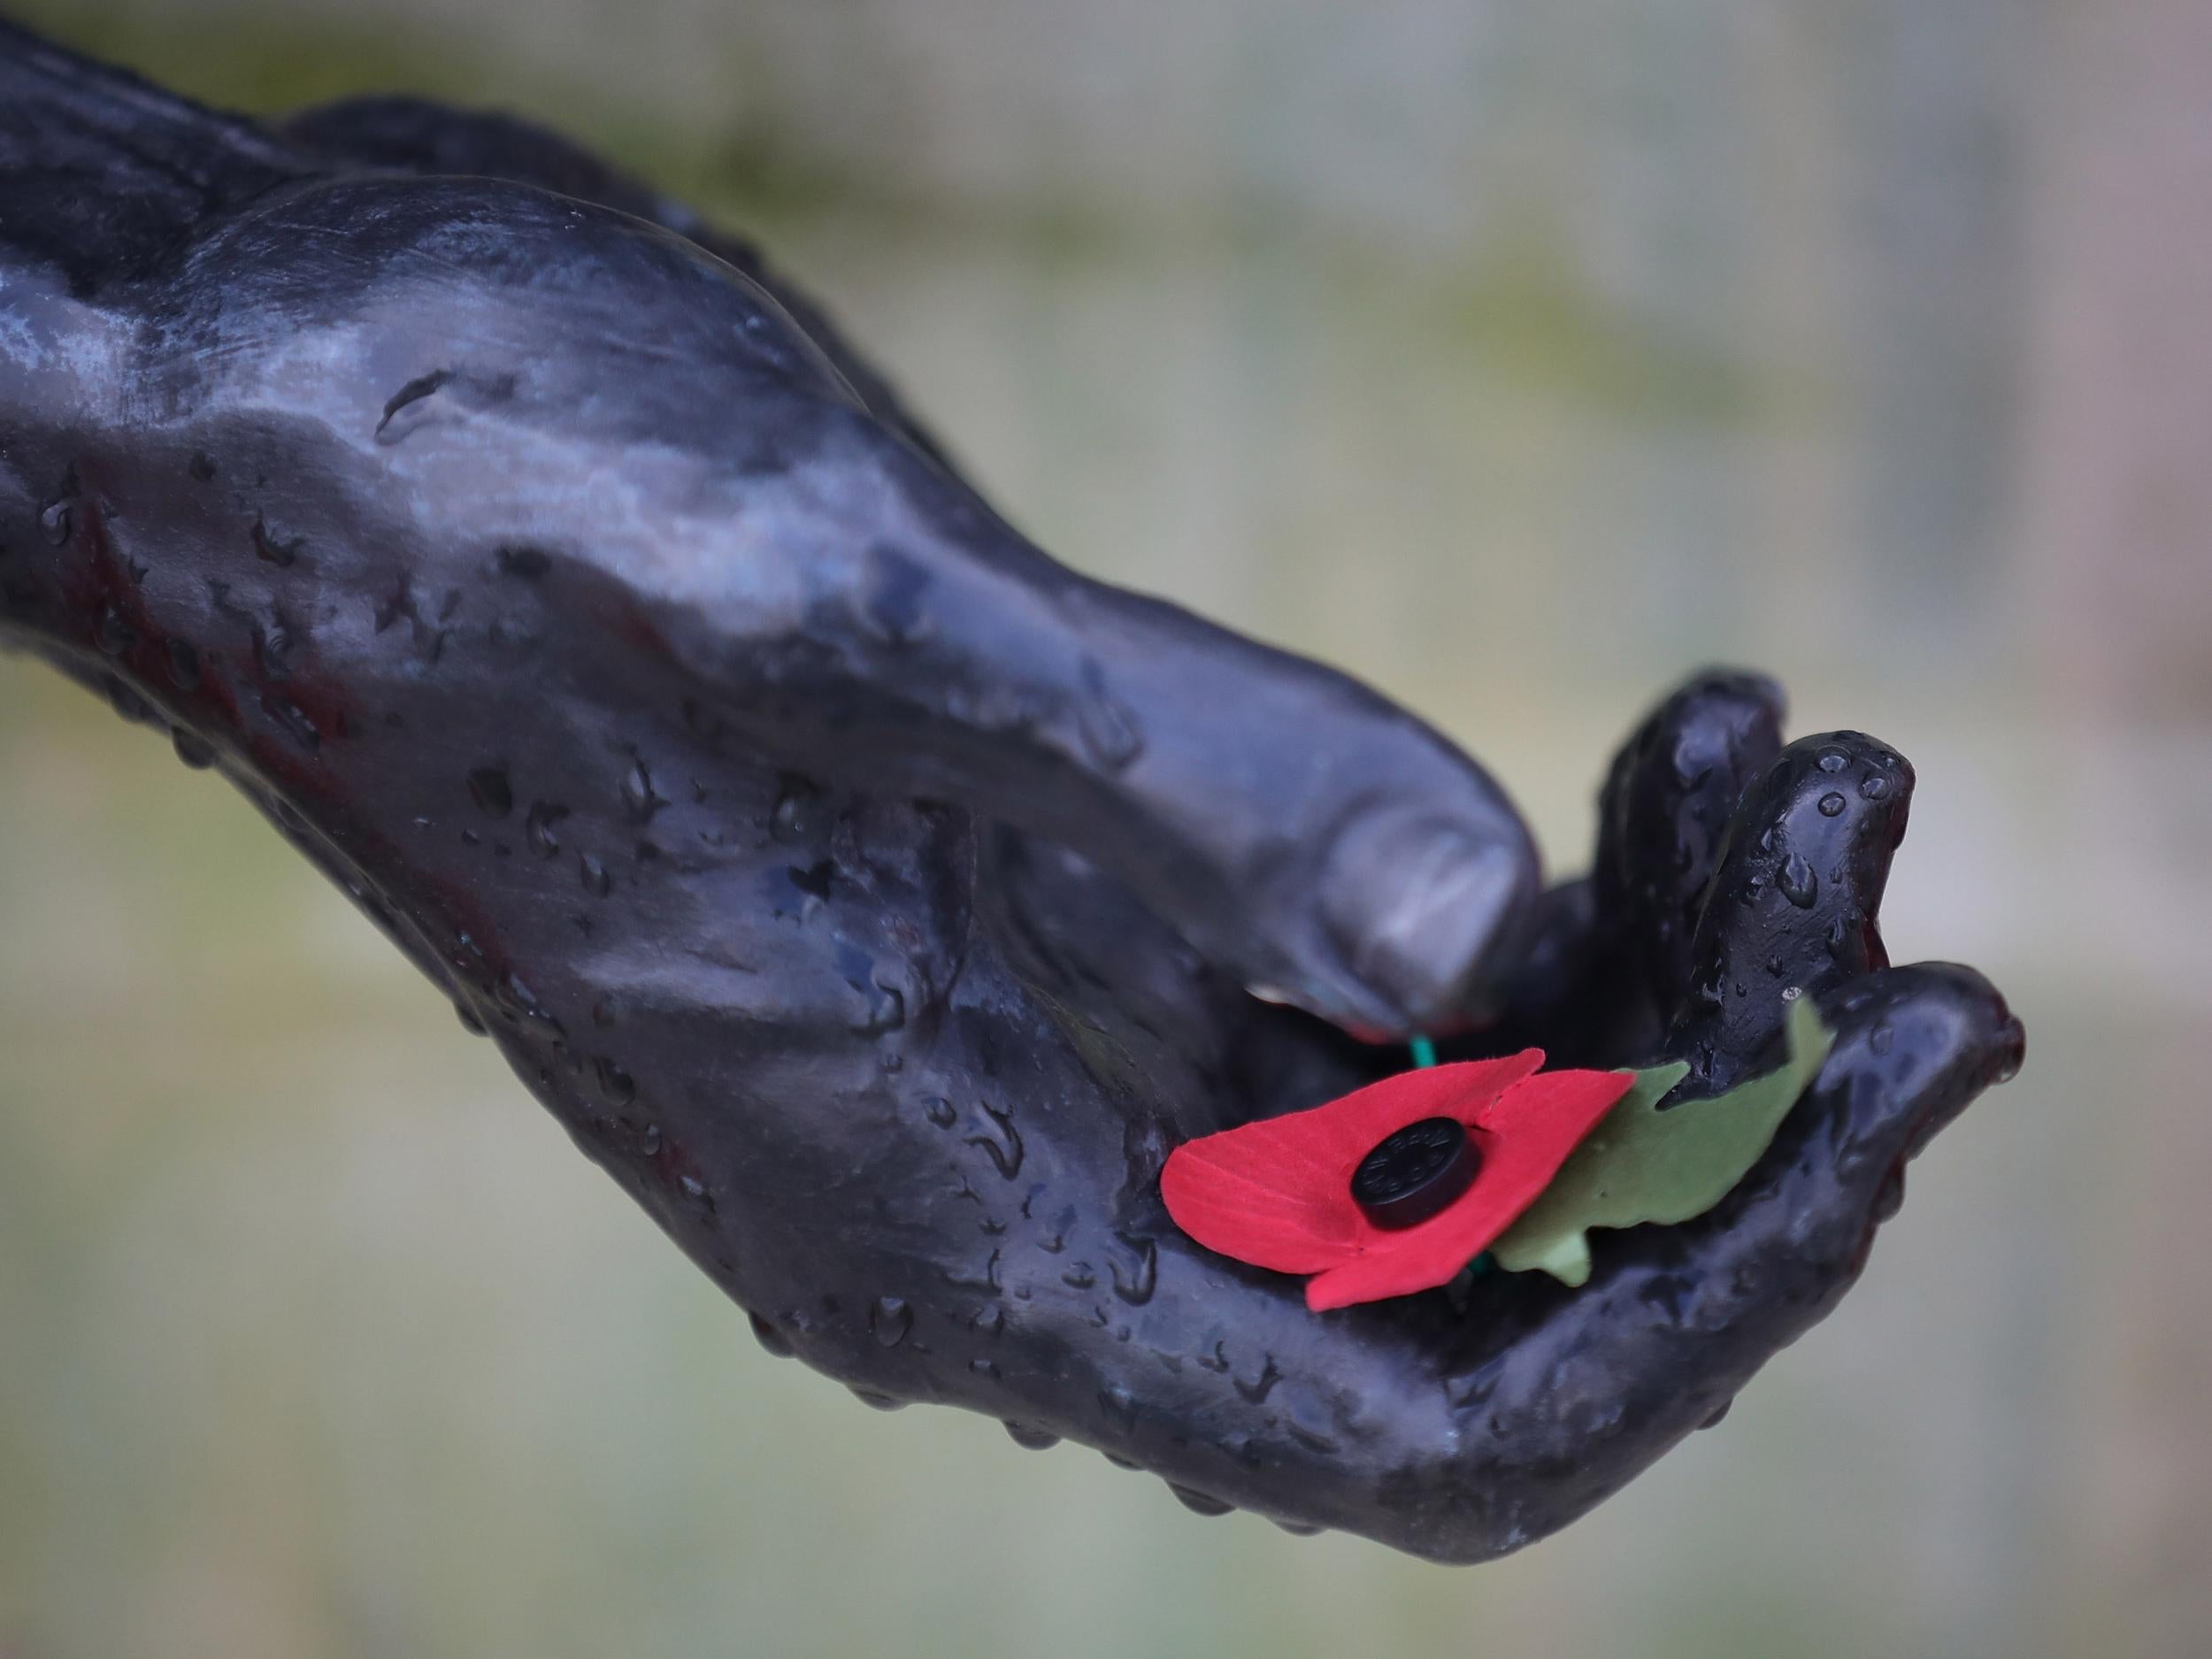 A poppy rests in the hand of a statue during the annual Armistice Day service at the National Memorial Arboretum in Staffordshire